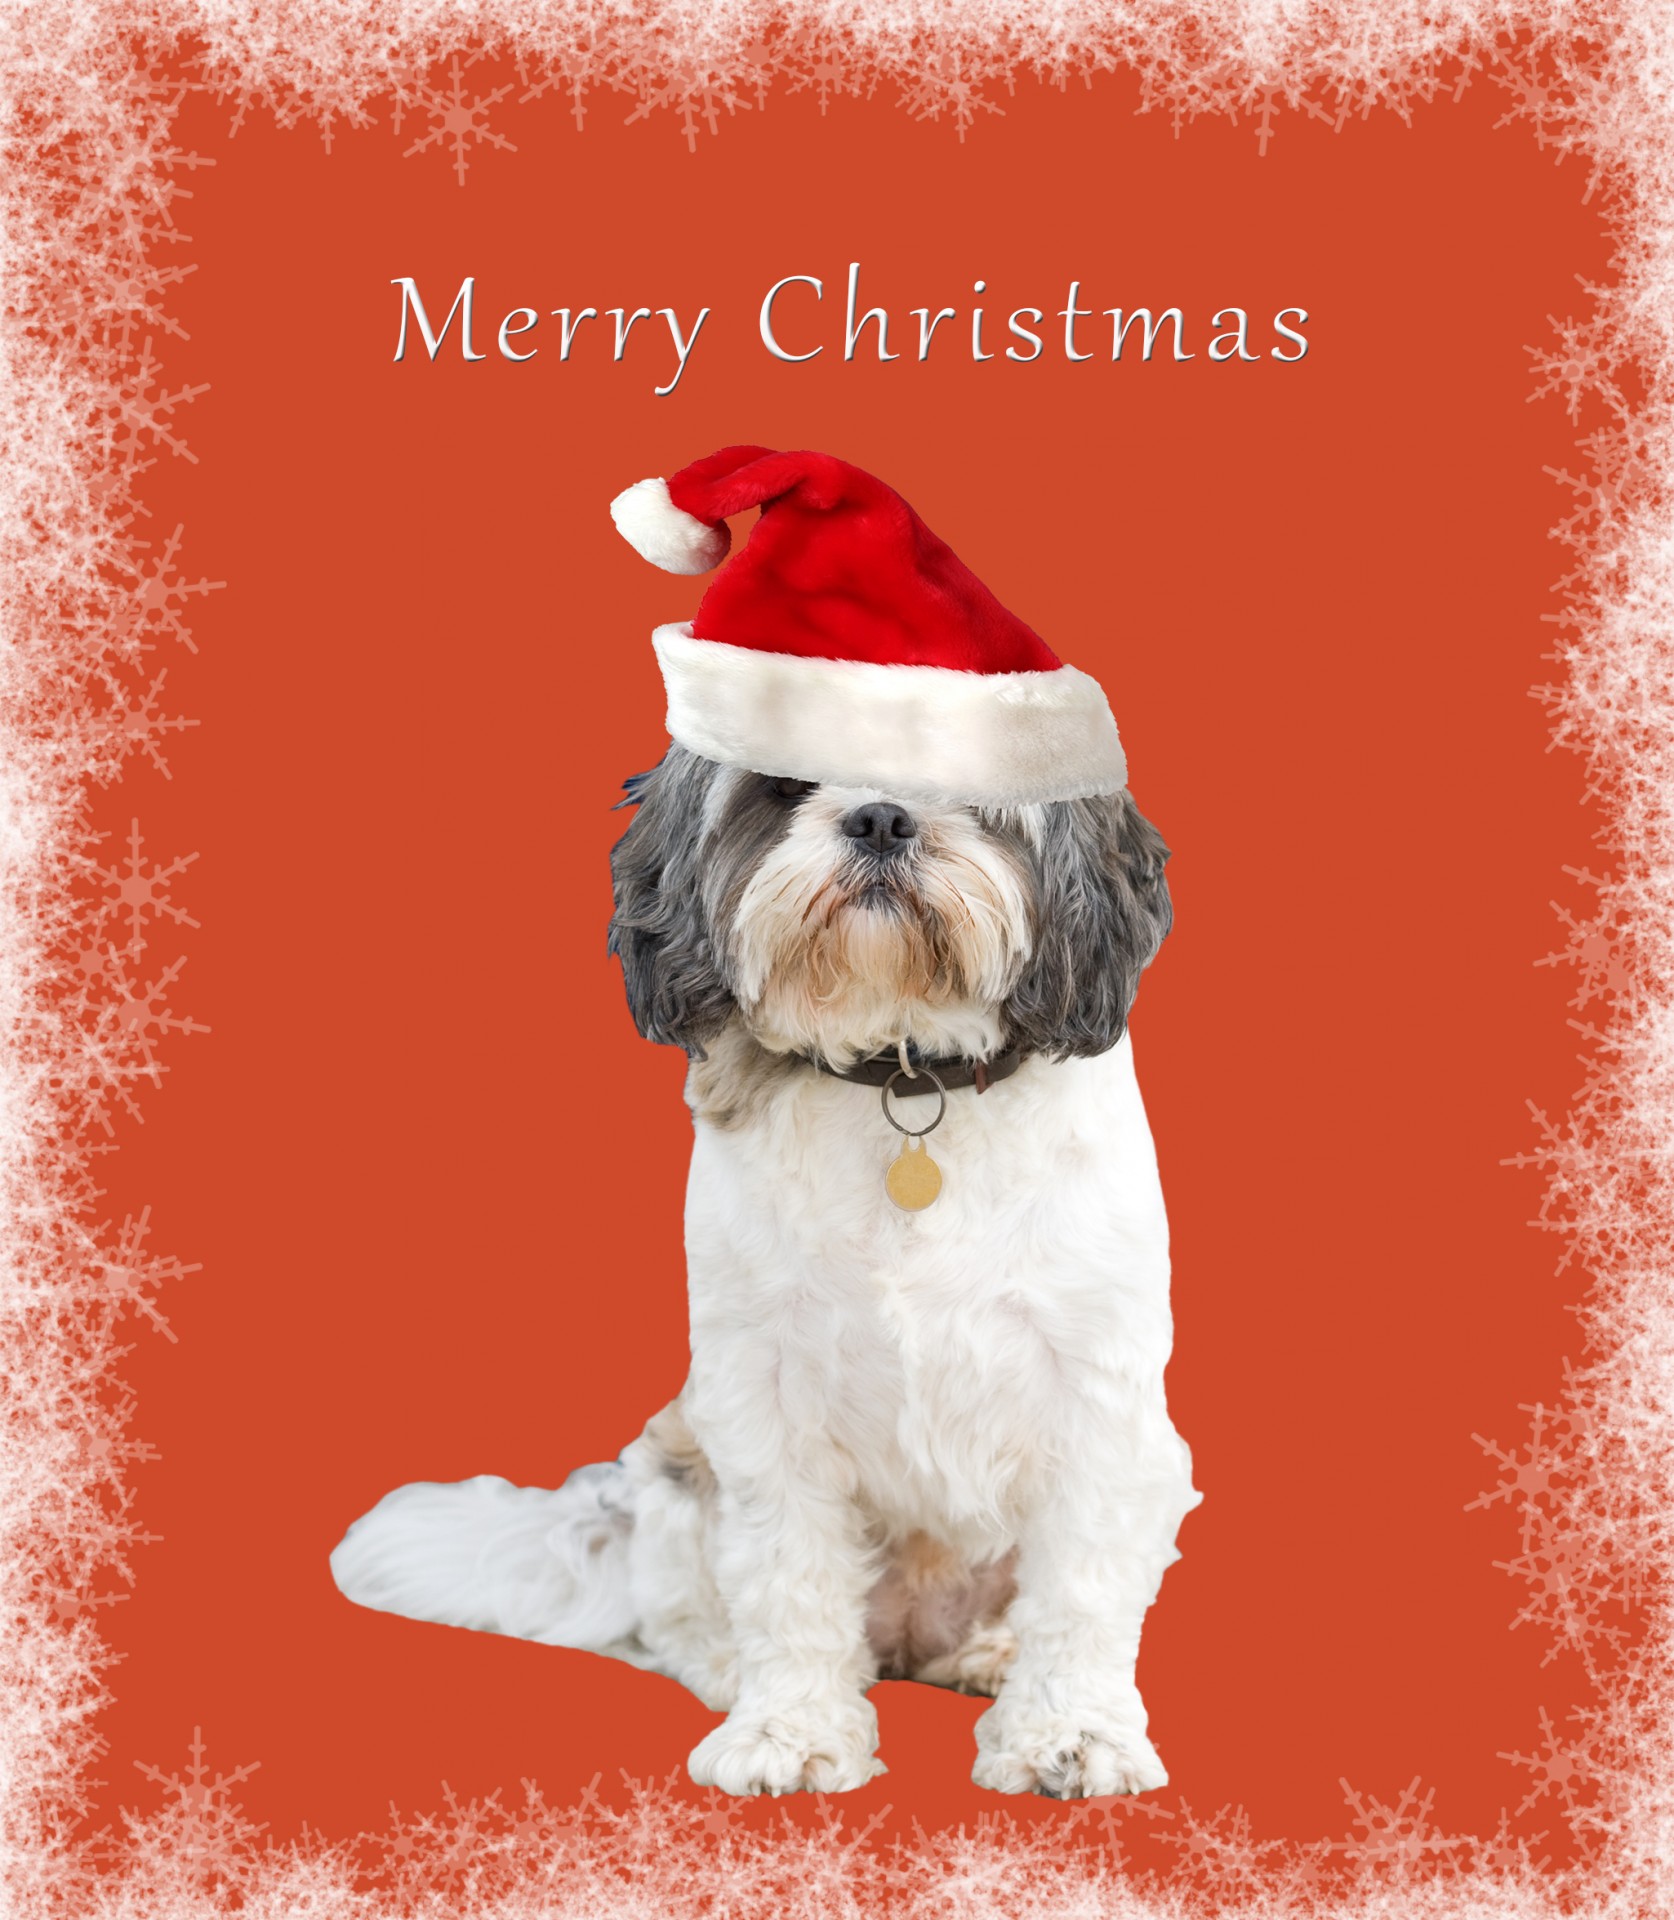 dog-christmas-card-free-stock-photo-public-domain-pictures